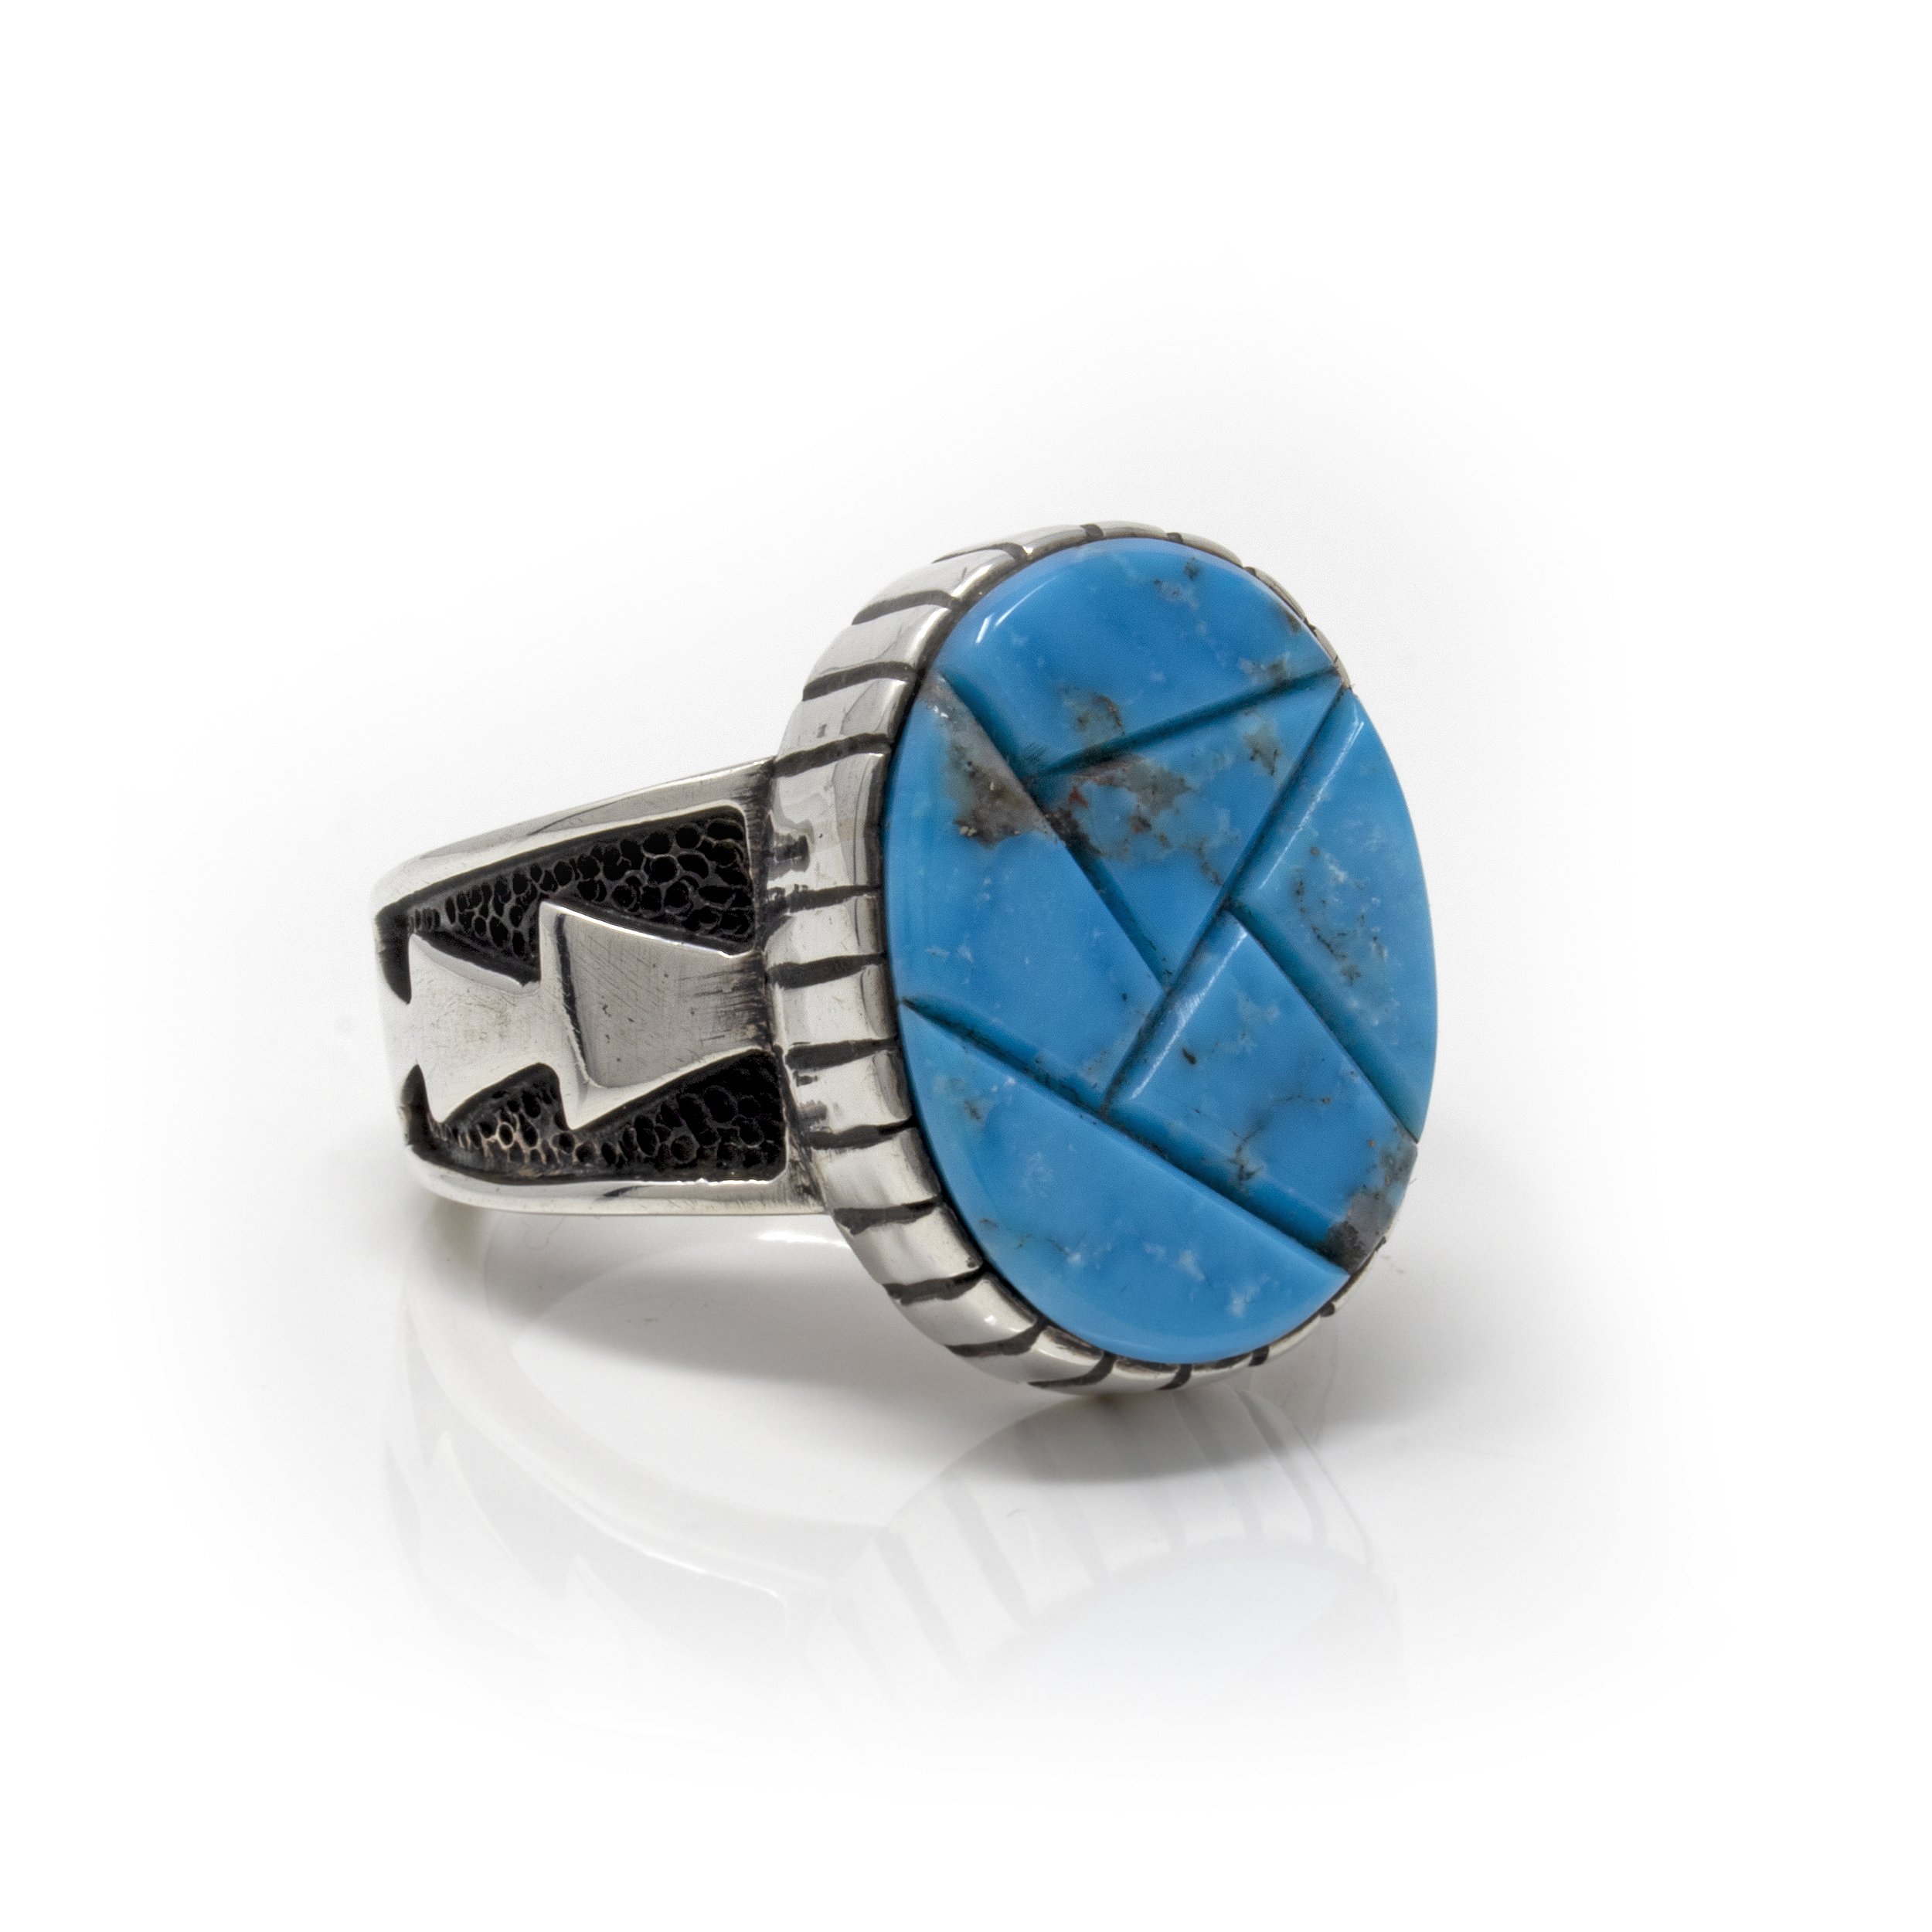 Kingman Az Turquoise Popcorn Inlay Ring Size 11 -Oval With Deep Edge And Oxidized Arrows On Band